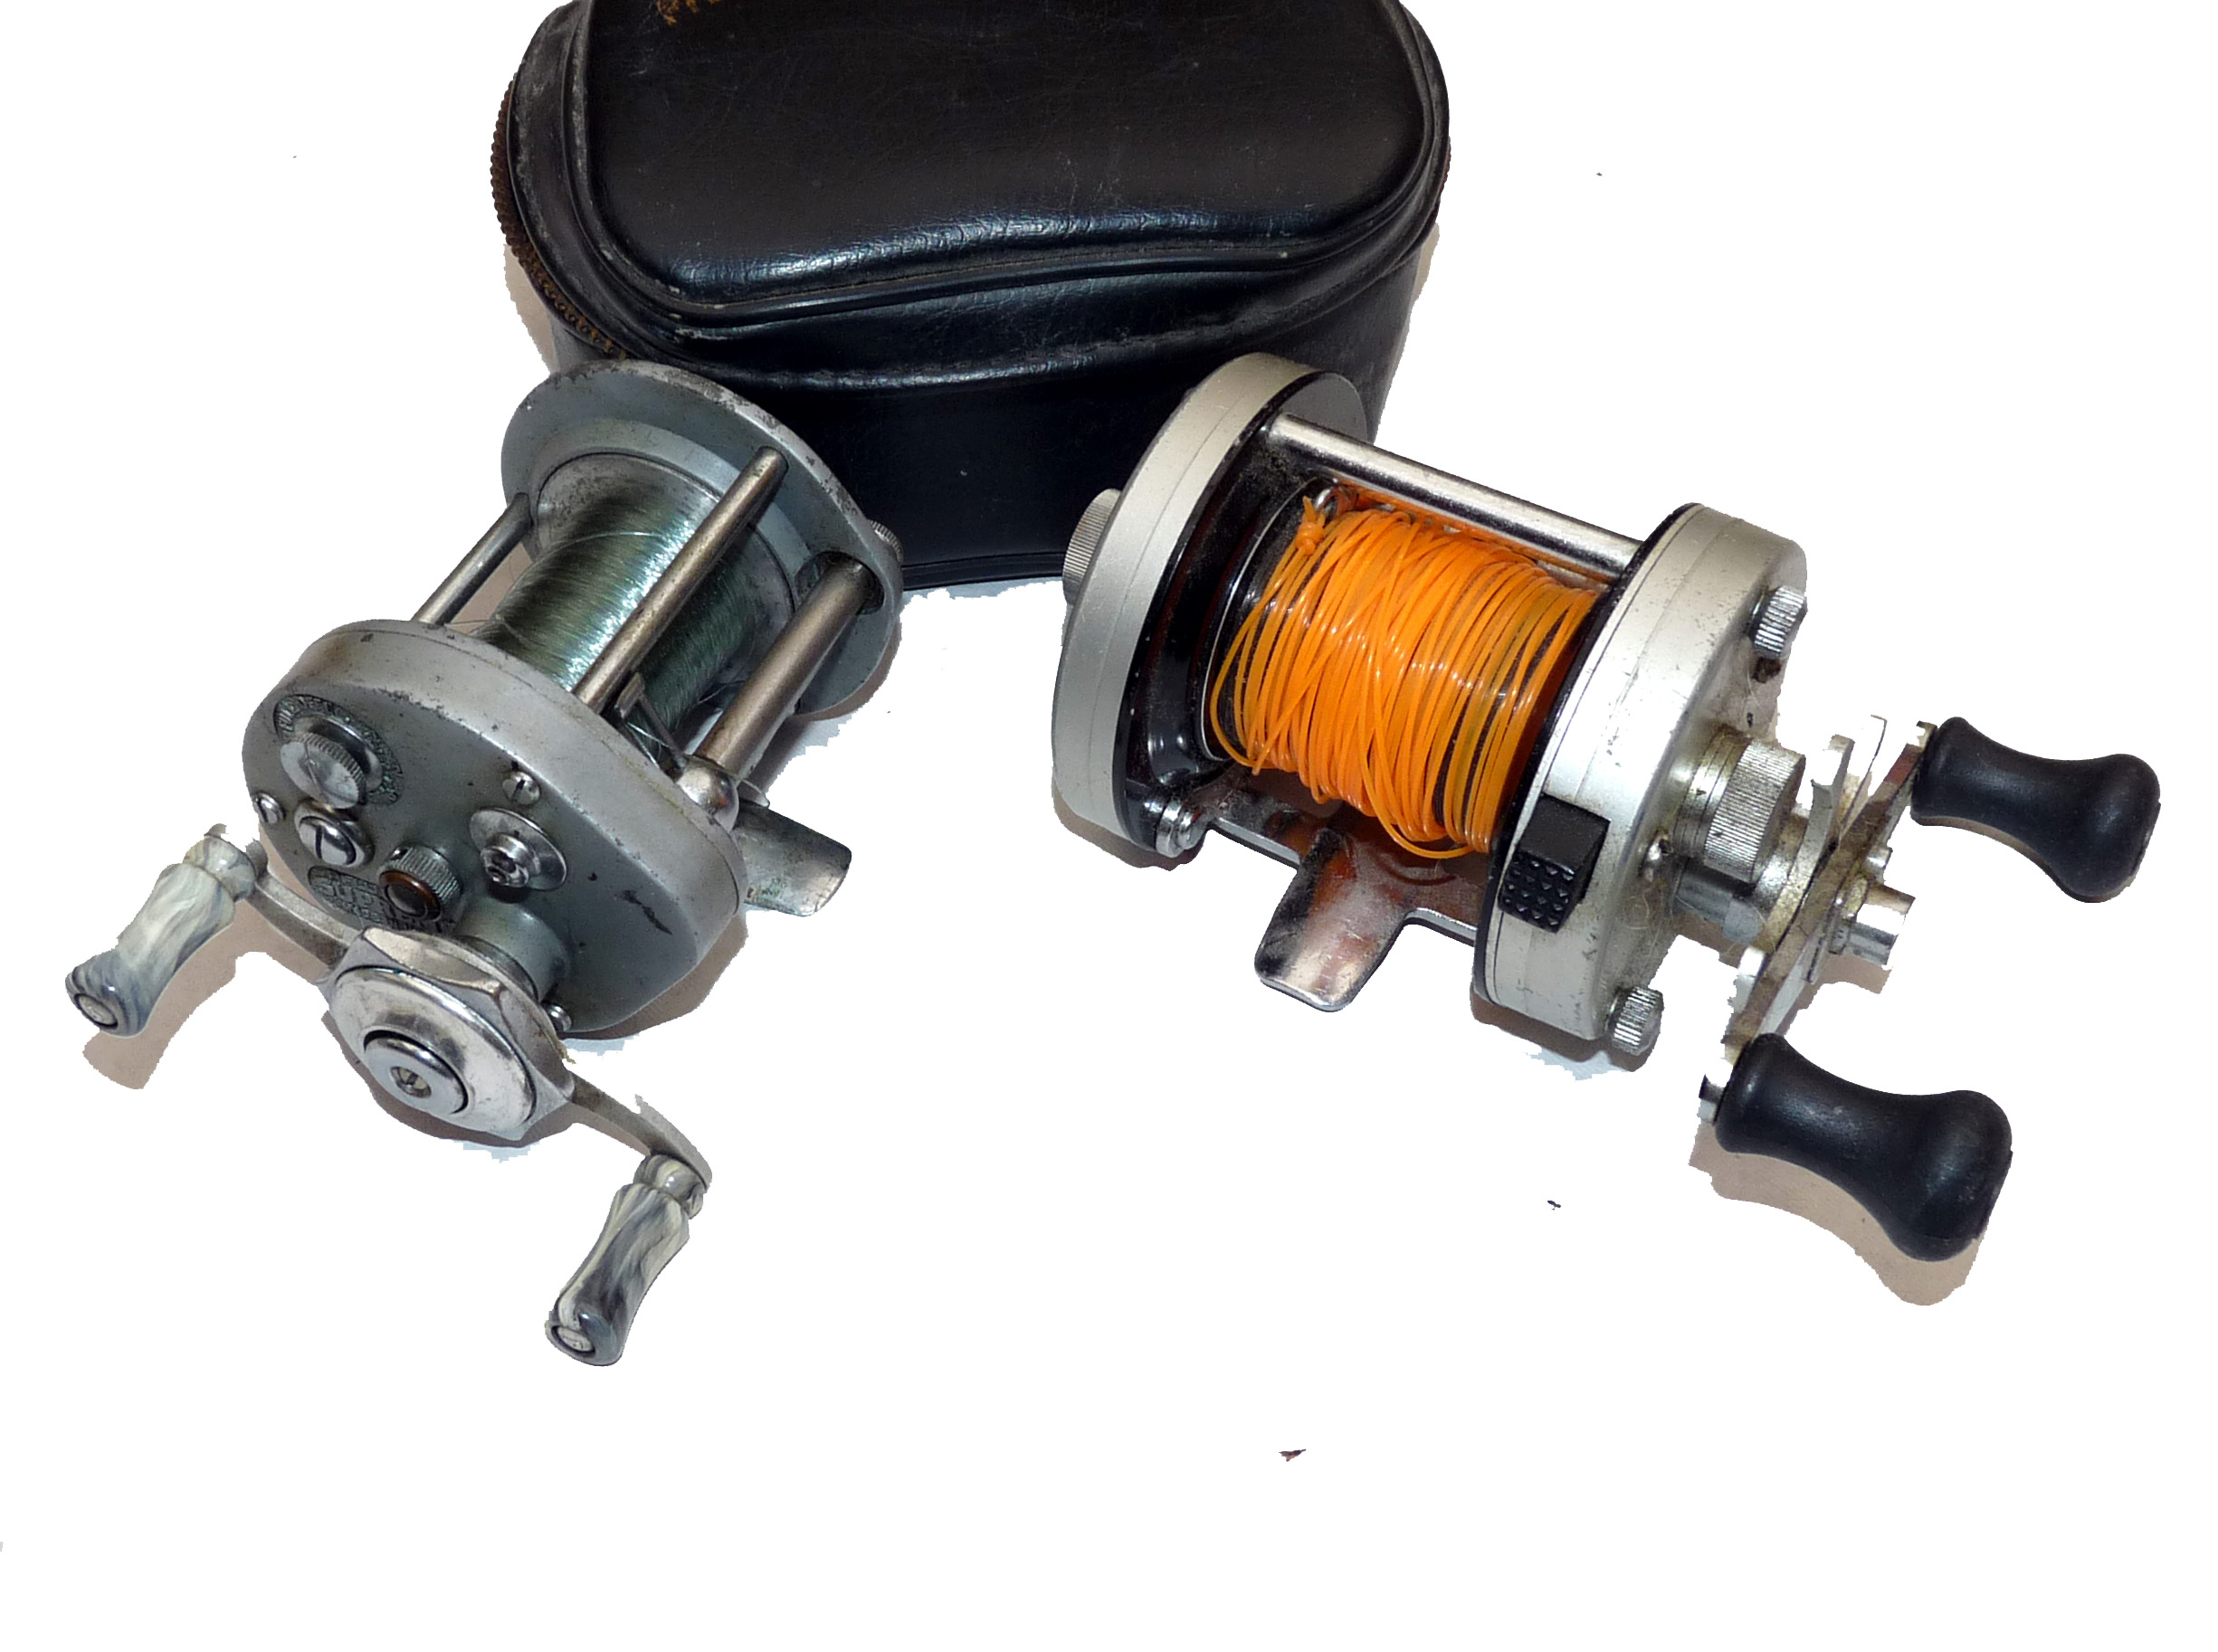 REELS (2): DAM Champion 800LW tournament style multiplier reel, with open casting frame, free spool,